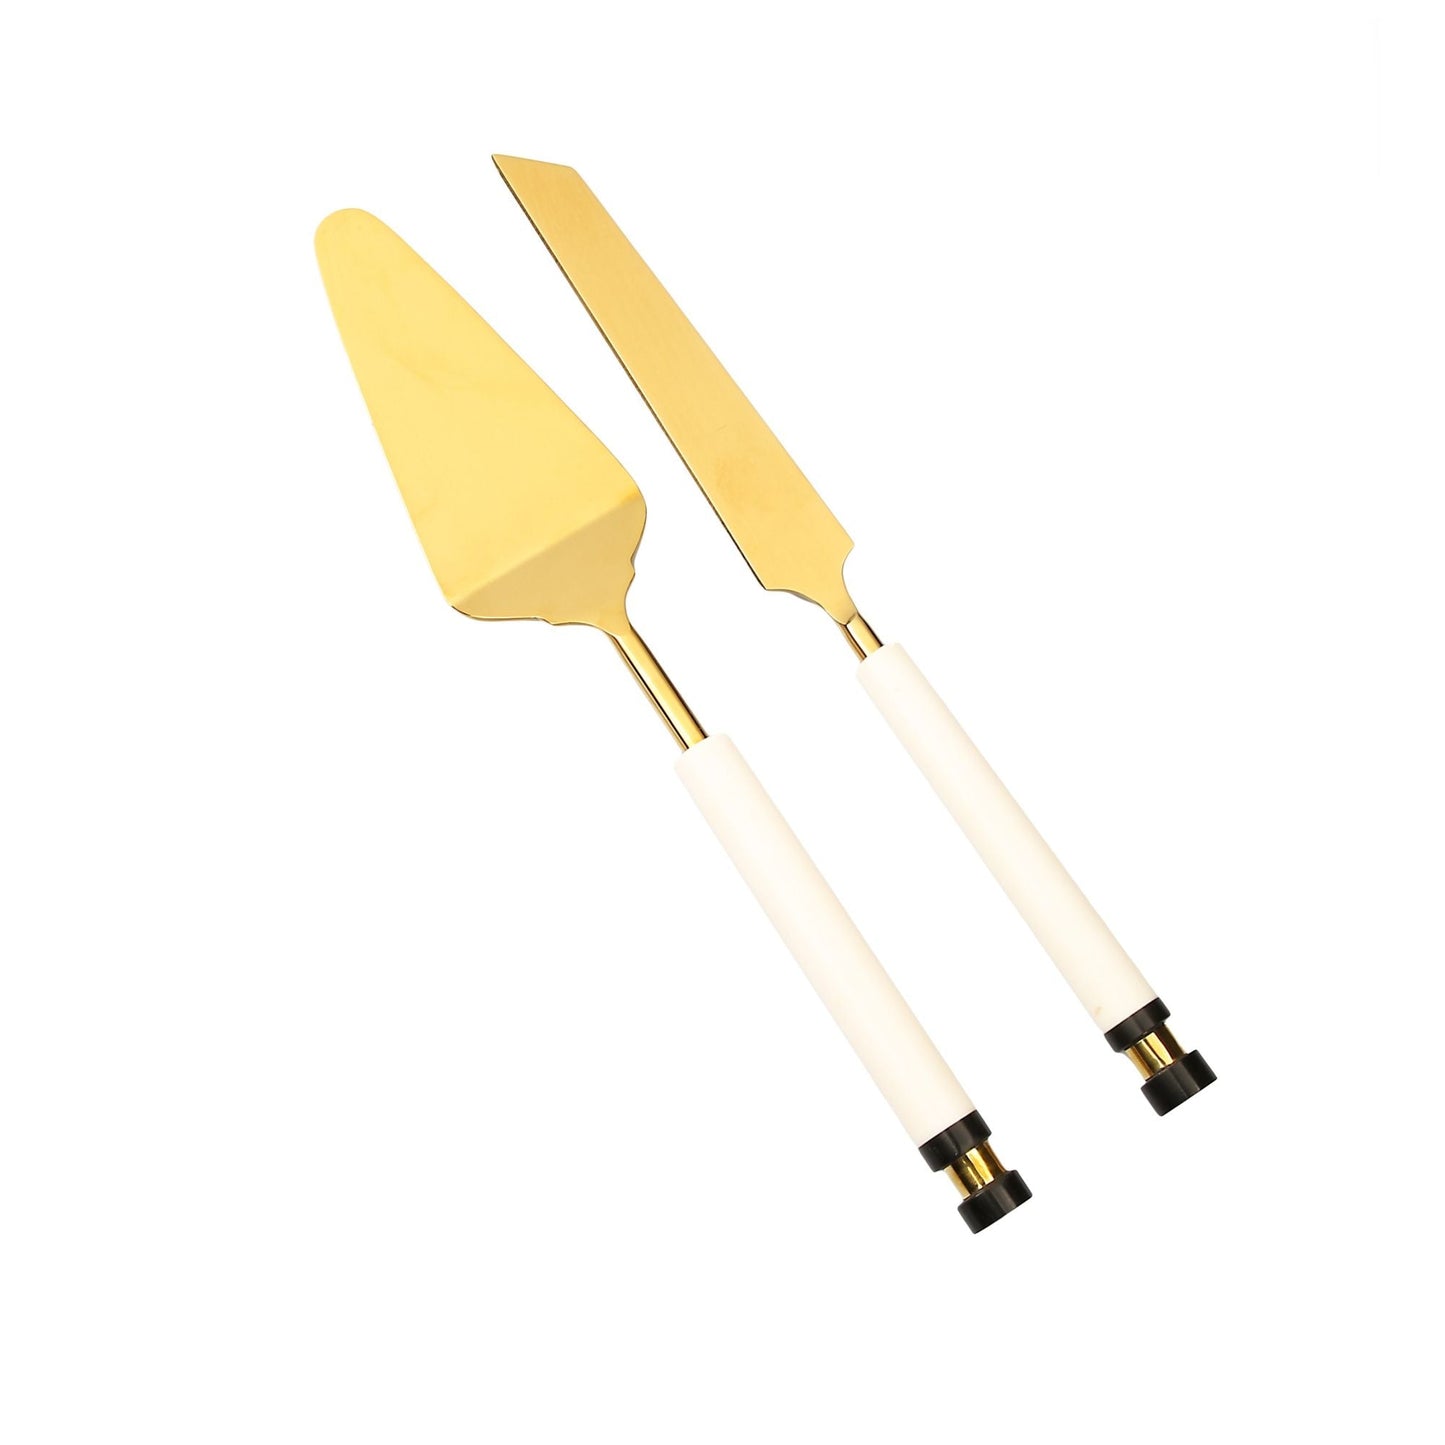 Classic Touch Set Of 2 Gold Cake Servers With White Stone Handle Insert, 11.25"